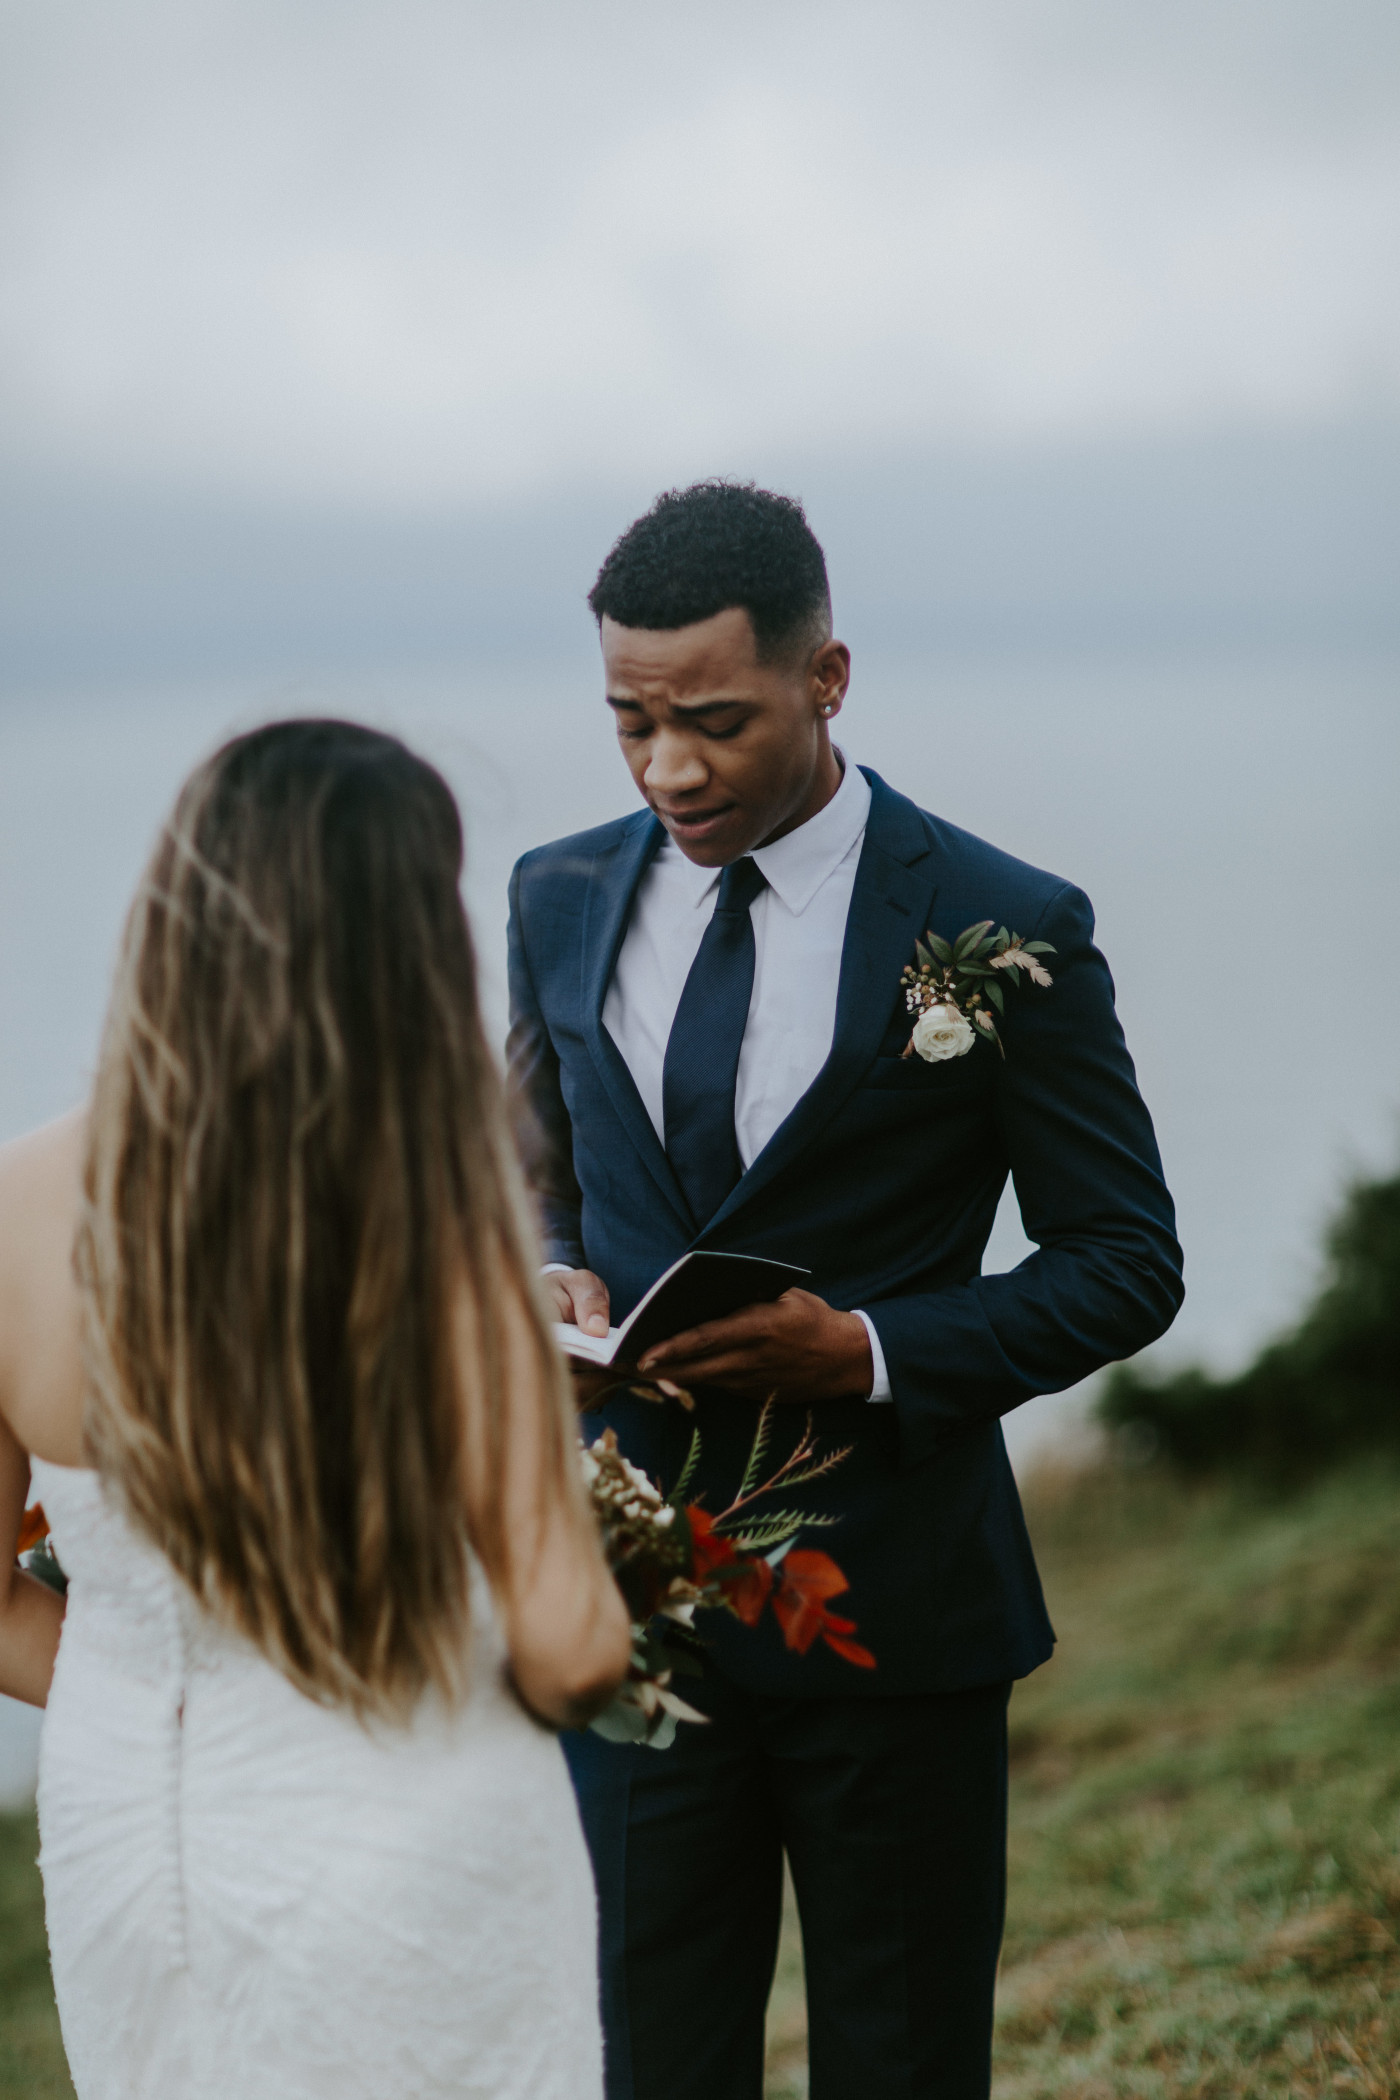 Deandre reads his vows during his elopement. Elopement photography at Mount Hood by Sienna Plus Josh.